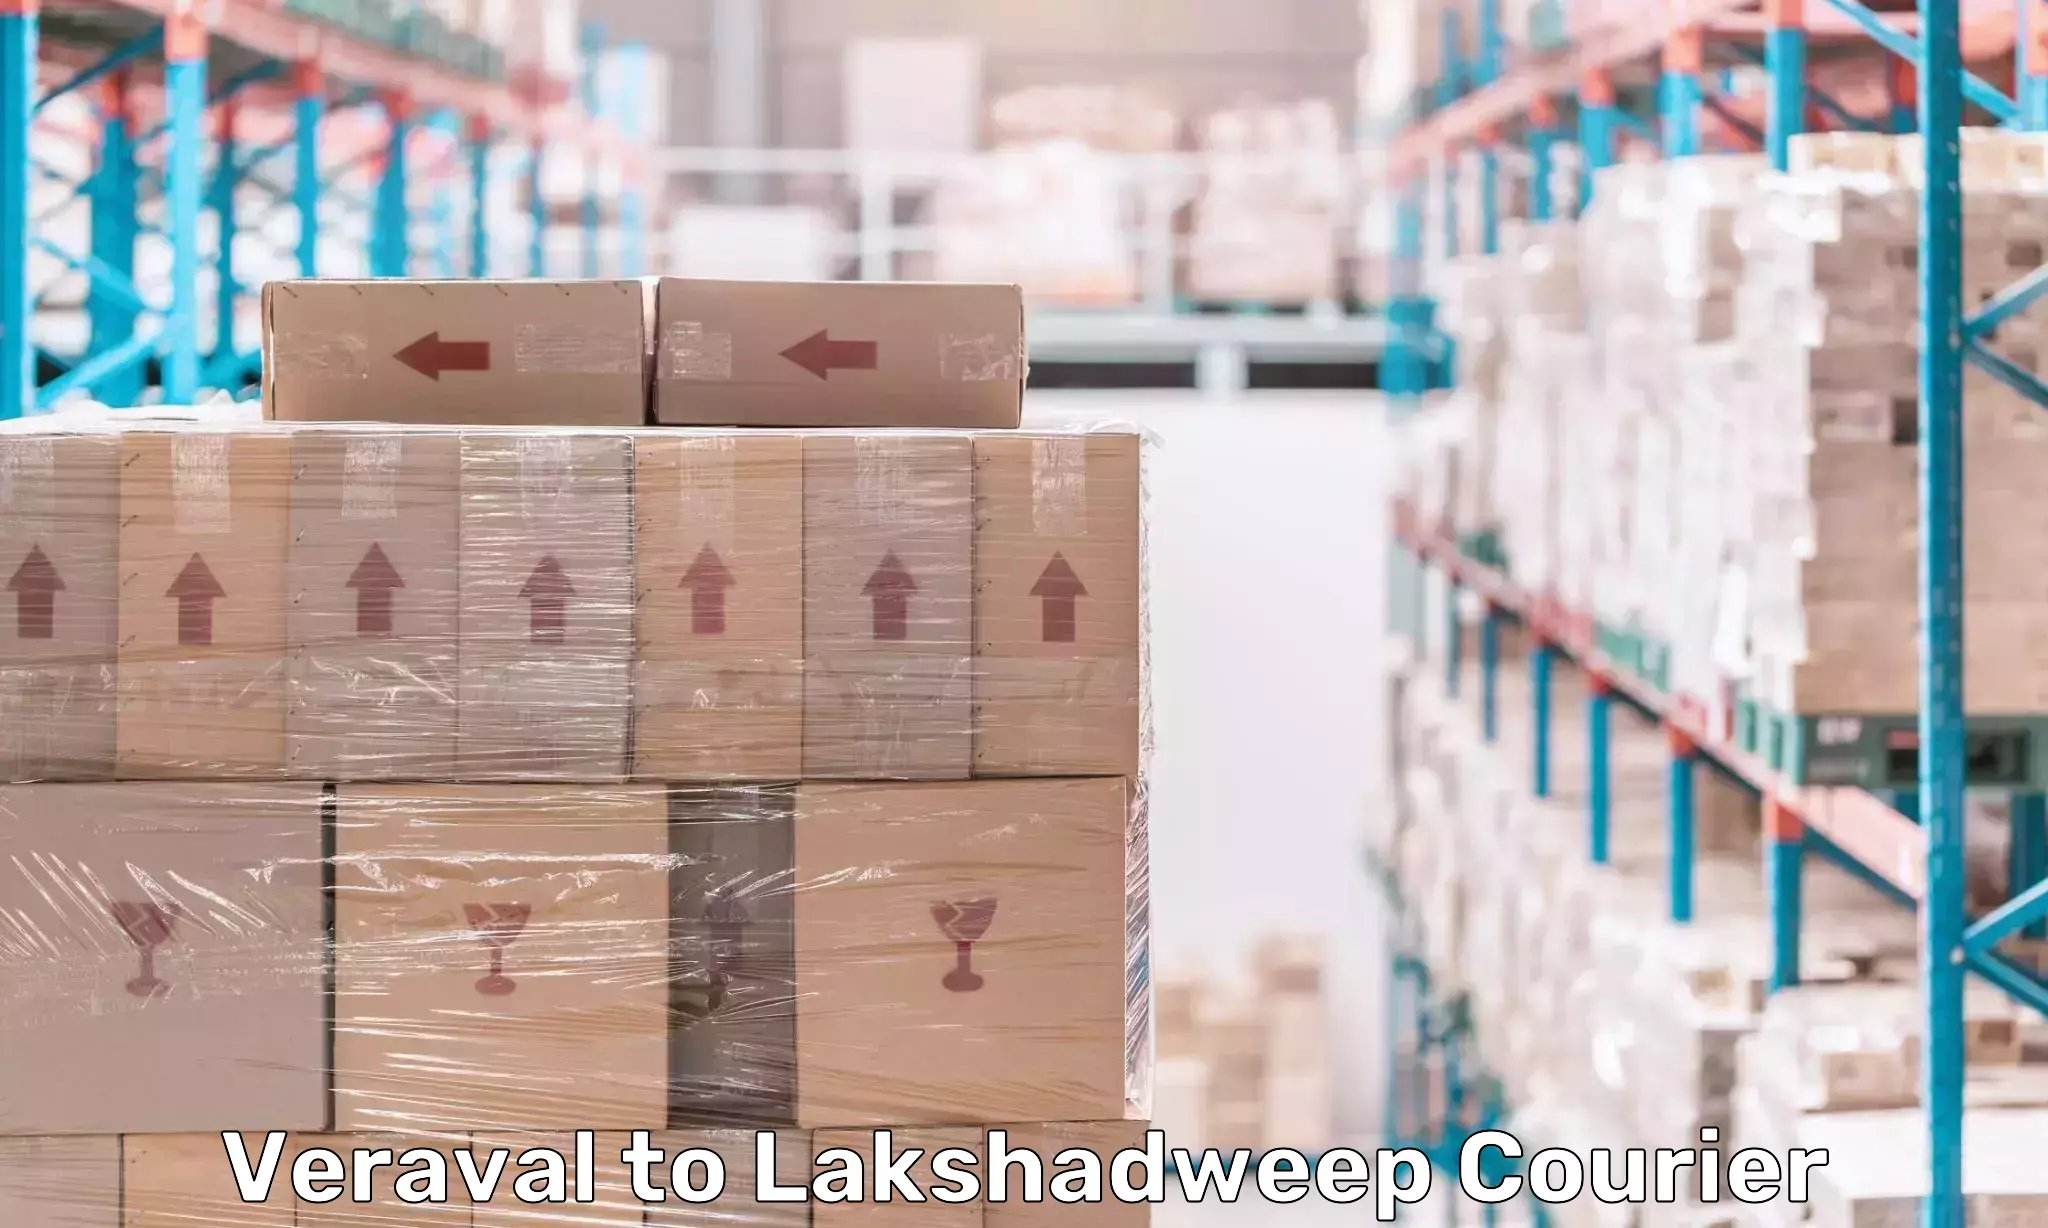 On-demand courier Veraval to Lakshadweep